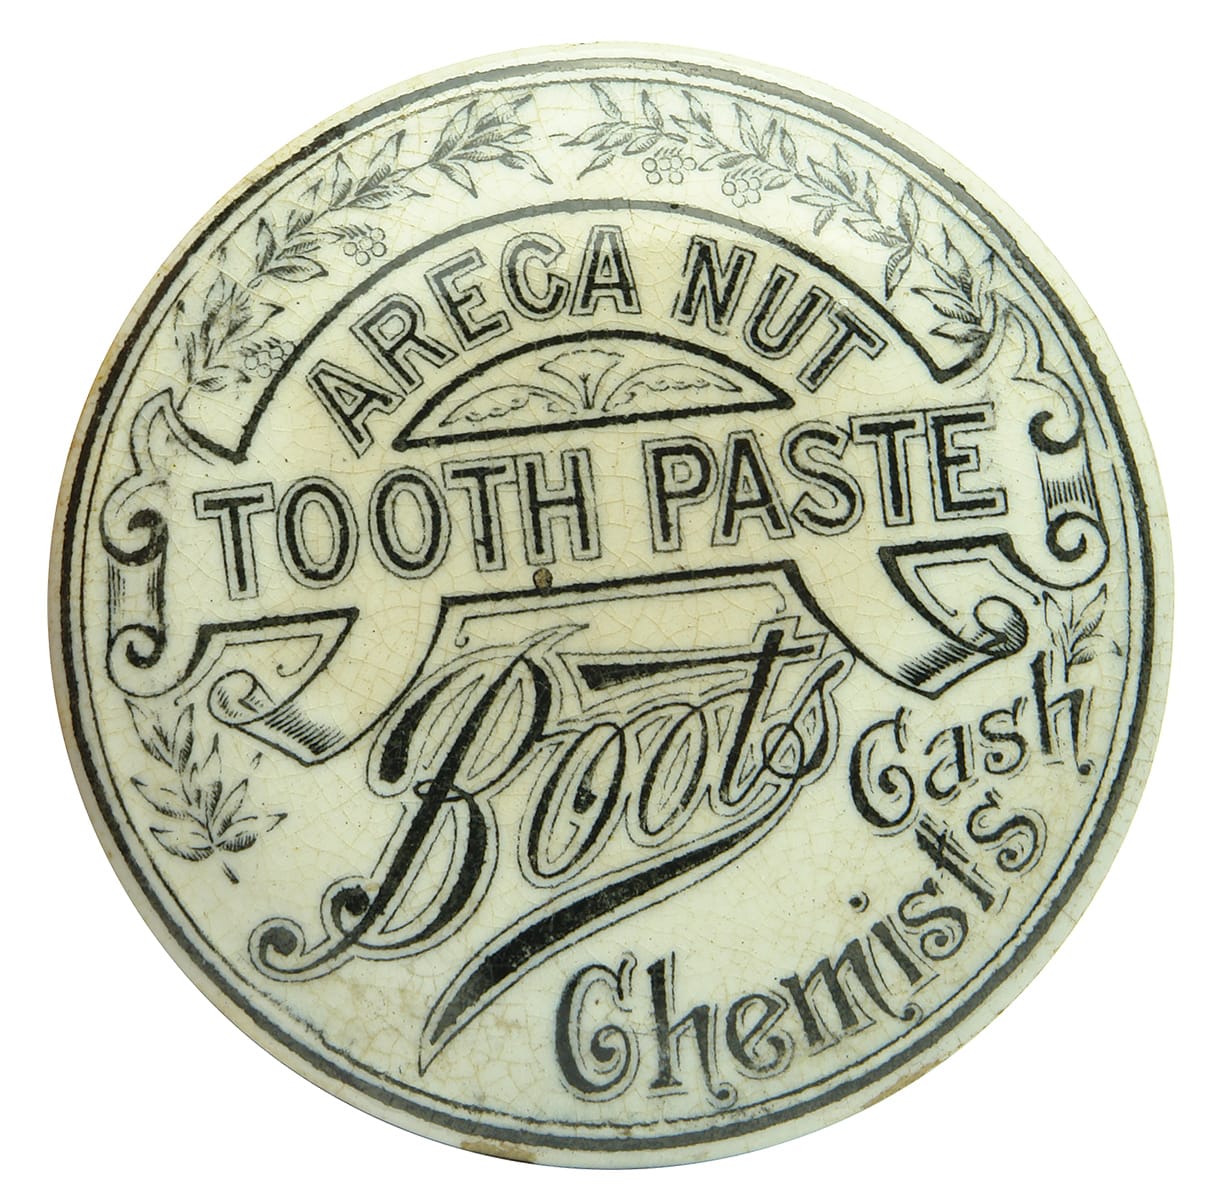 Boots Areca Nut Tooth Paste Pot Lid